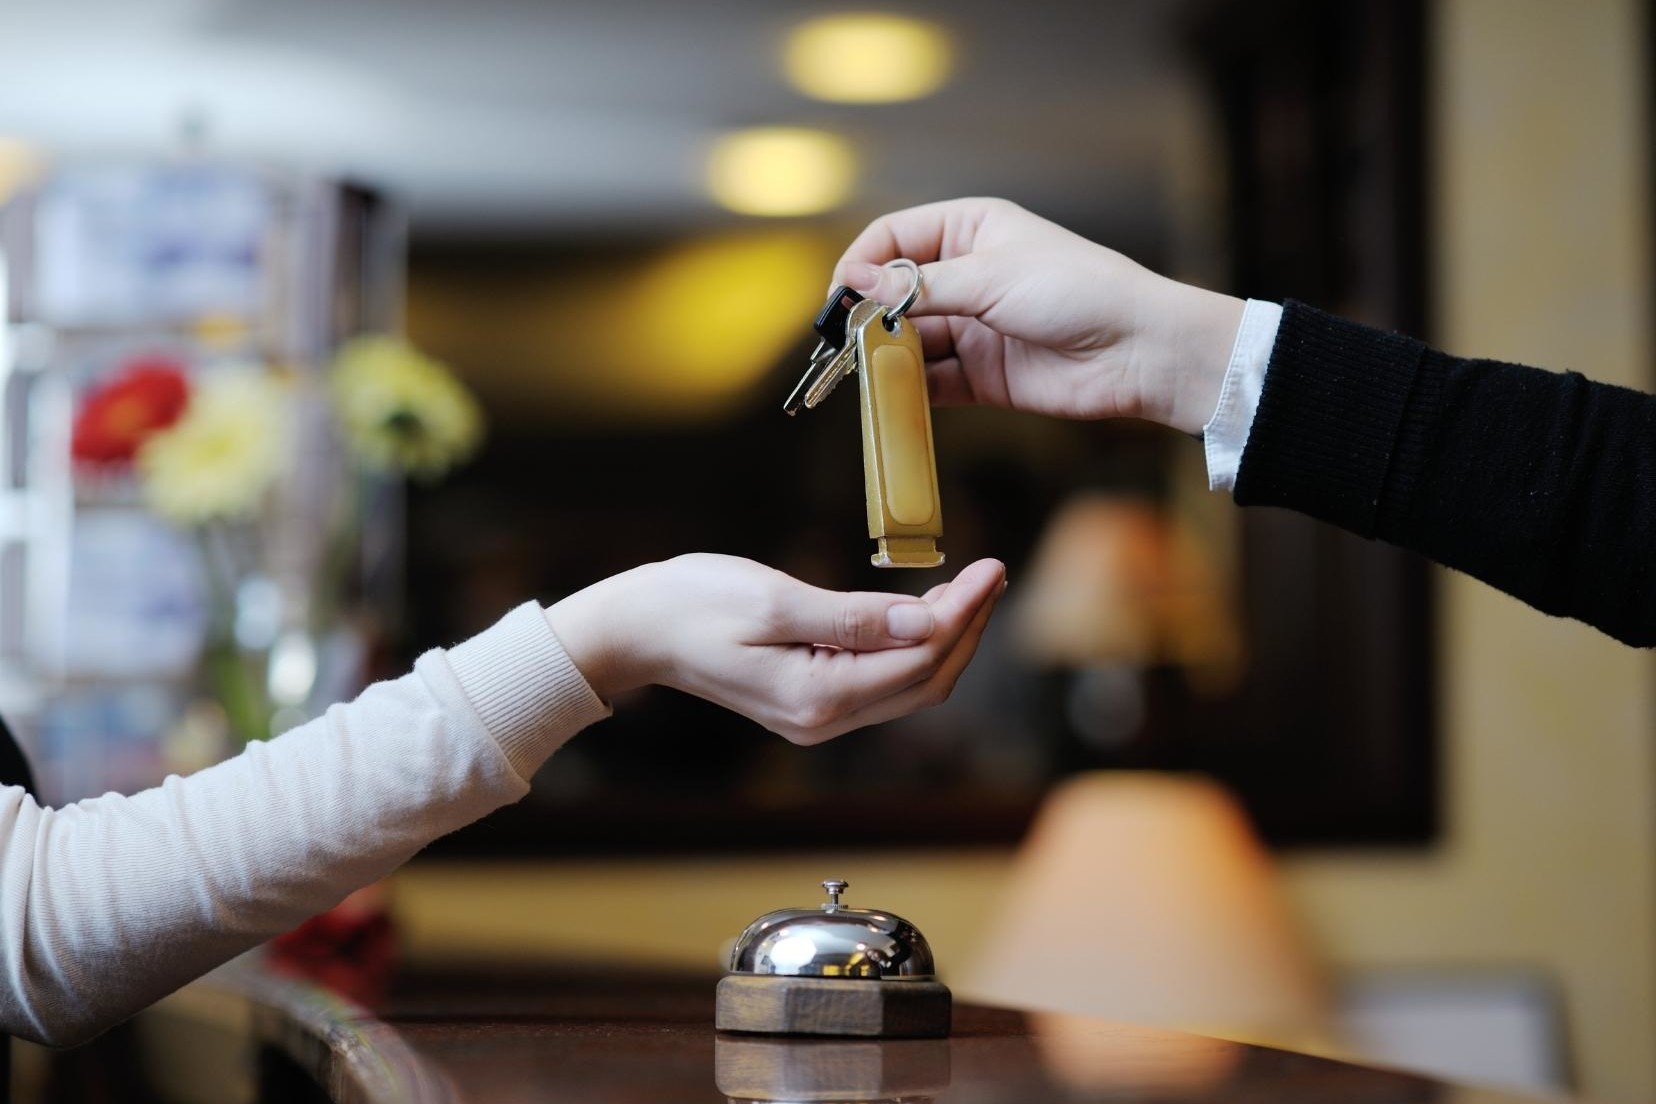 IoT automation trends in the hospitality industry